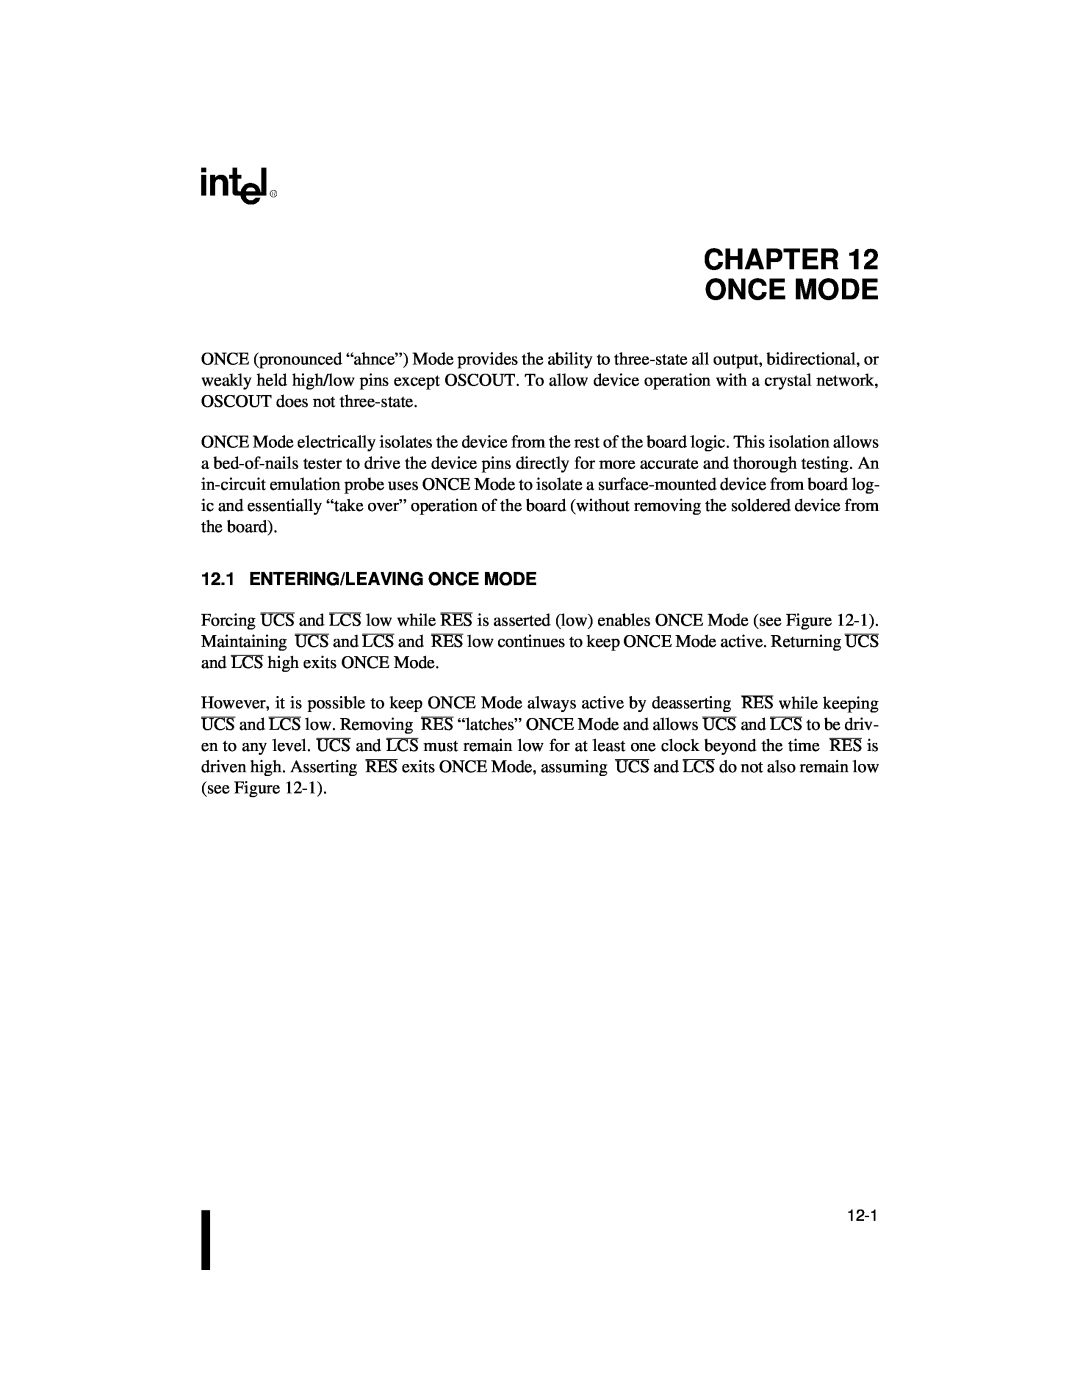 Intel 80C188XL, 80C186XL user manual Chapter Once Mode, Entering/Leaving Once Mode 